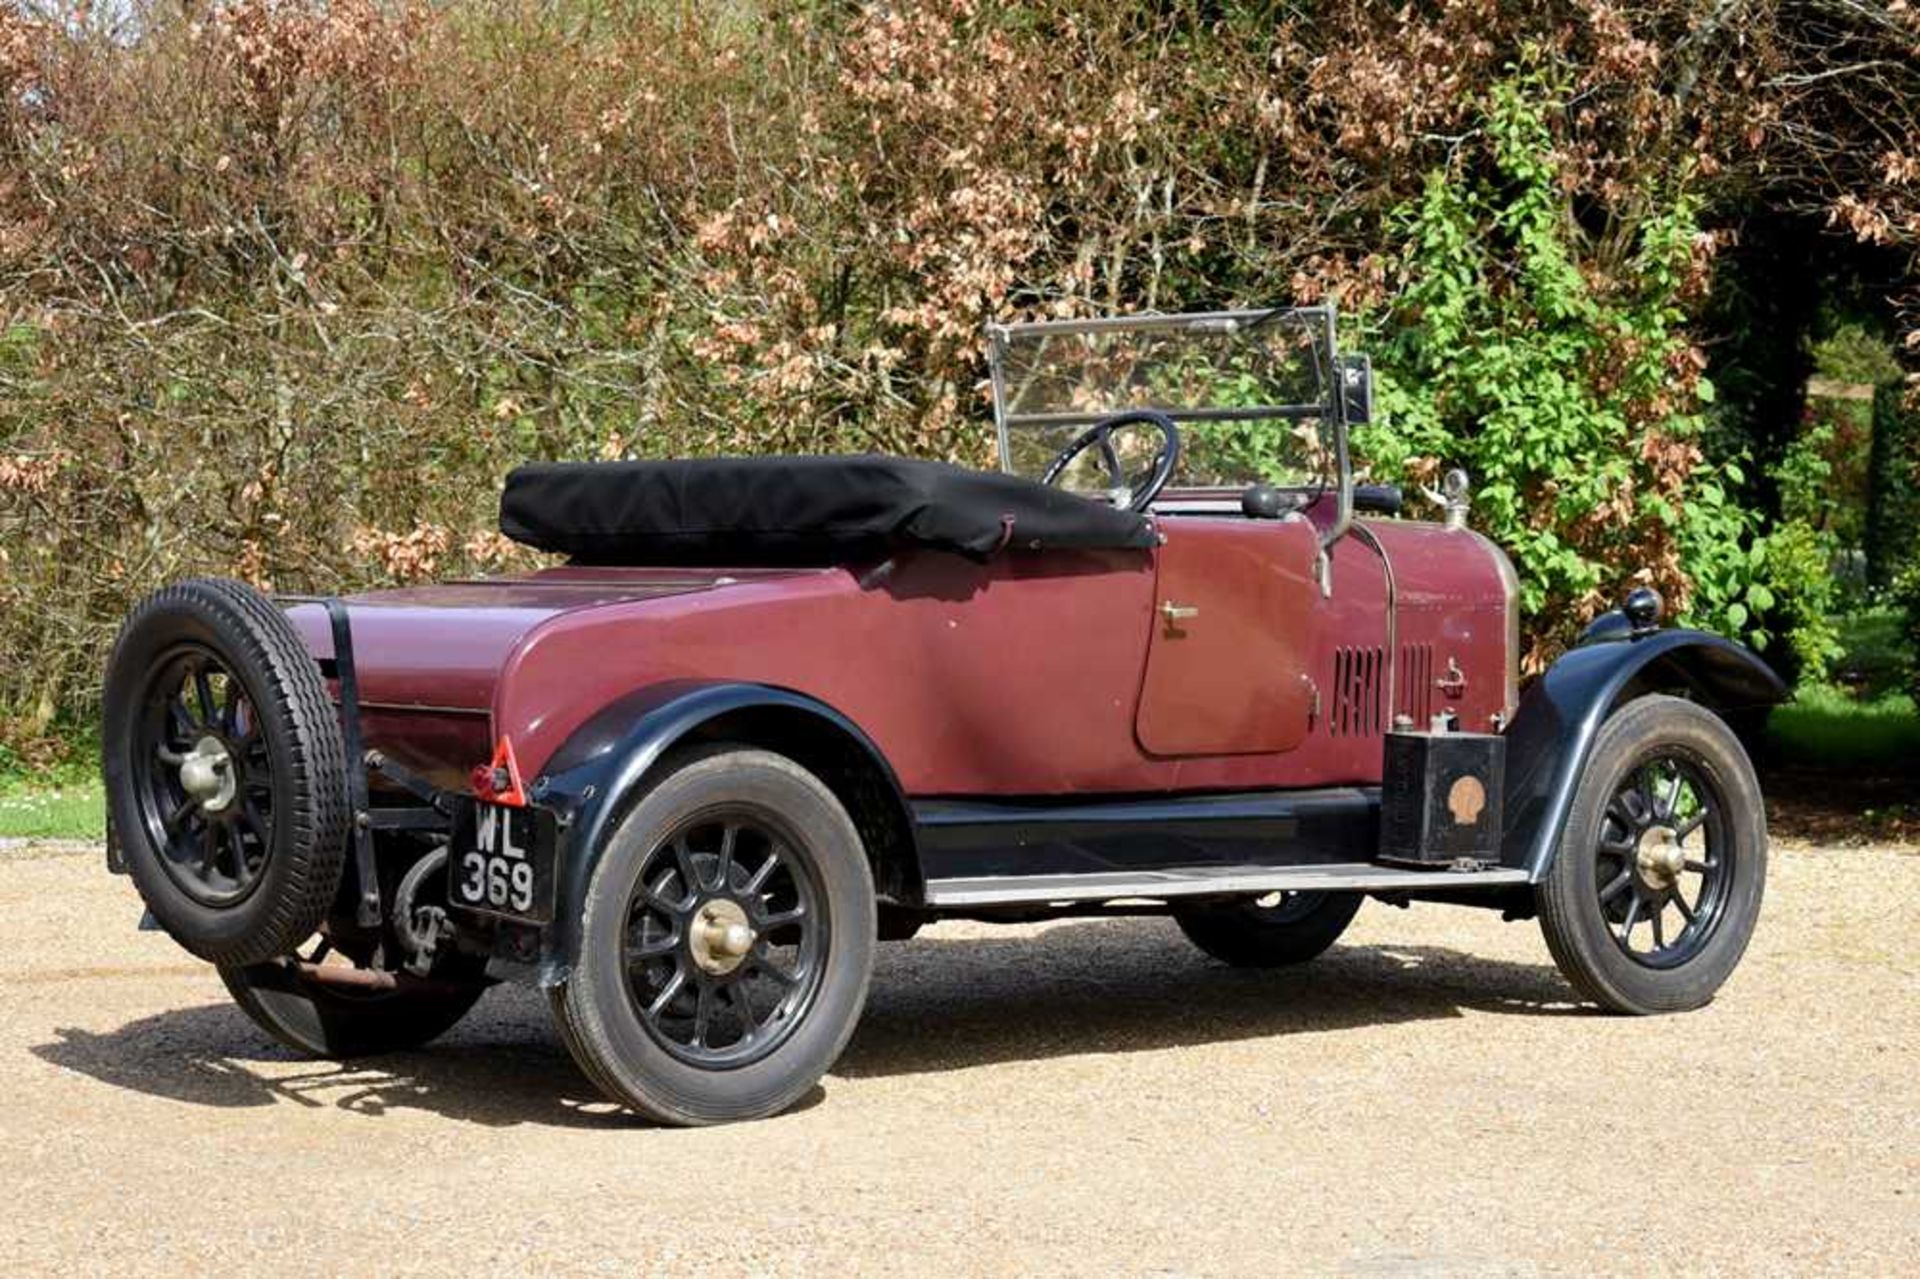 1926 Morris Oxford 'Bullnose' 2-Seat Tourer with Dickey - Image 23 of 99